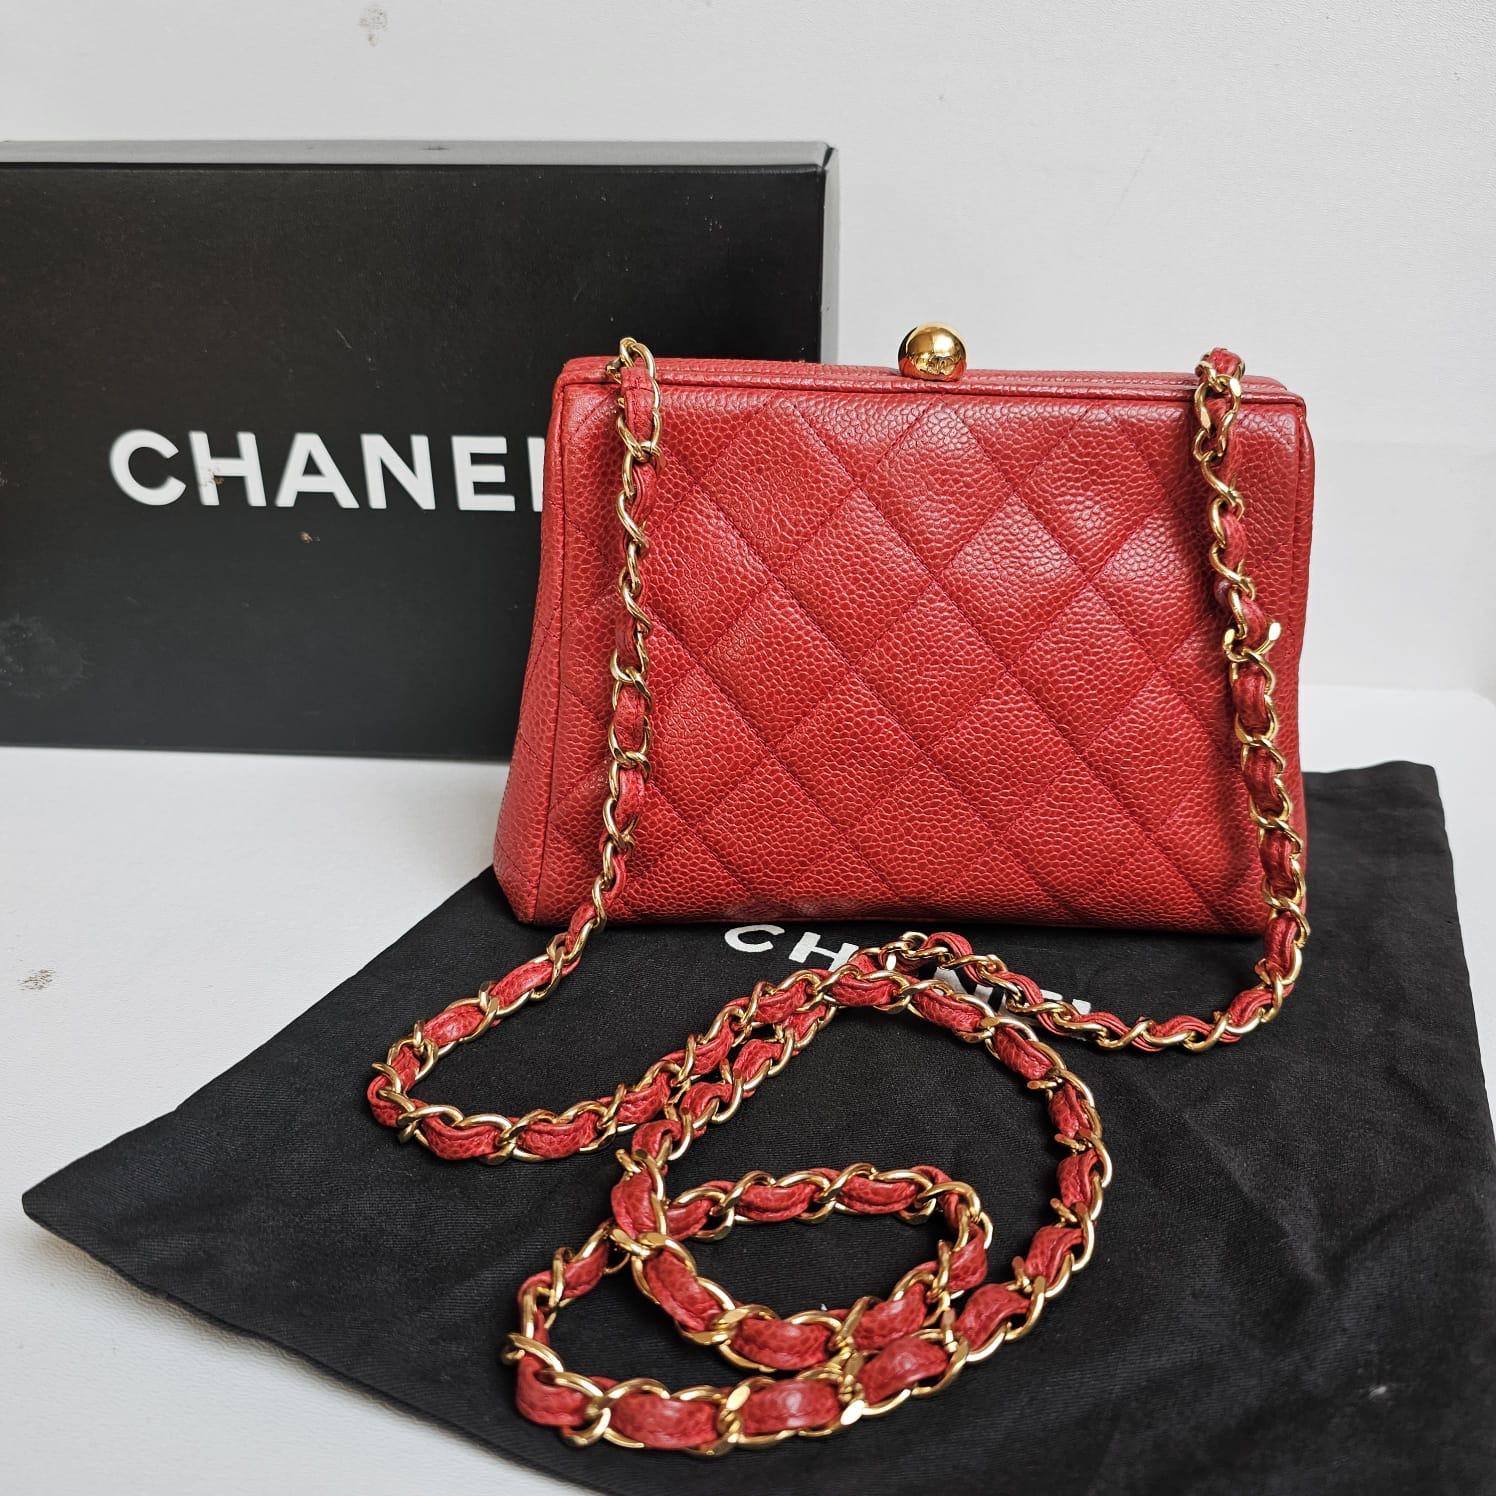 Beautiful vintage chanel in red caviar leather with gold hardware. Beautiful vintage condition. Very minor darkening on the area thats in leather contact with the hardware. Series #3. Comes with its holo sticker, card and dust bag. 